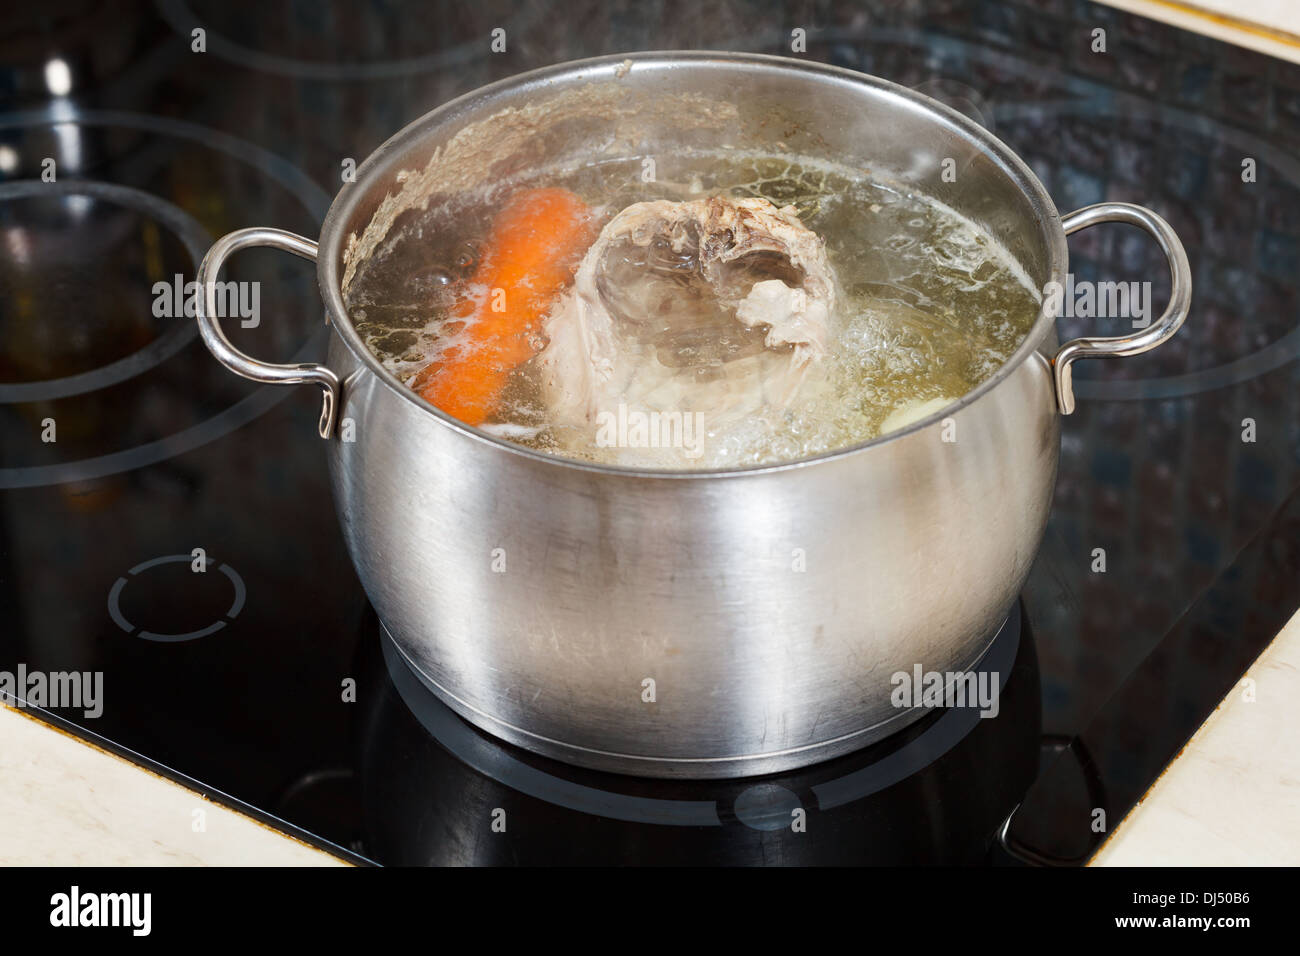 simmering chicken soup with seasoning vegetables in steel pot on glass ceramic cooker Stock Photo